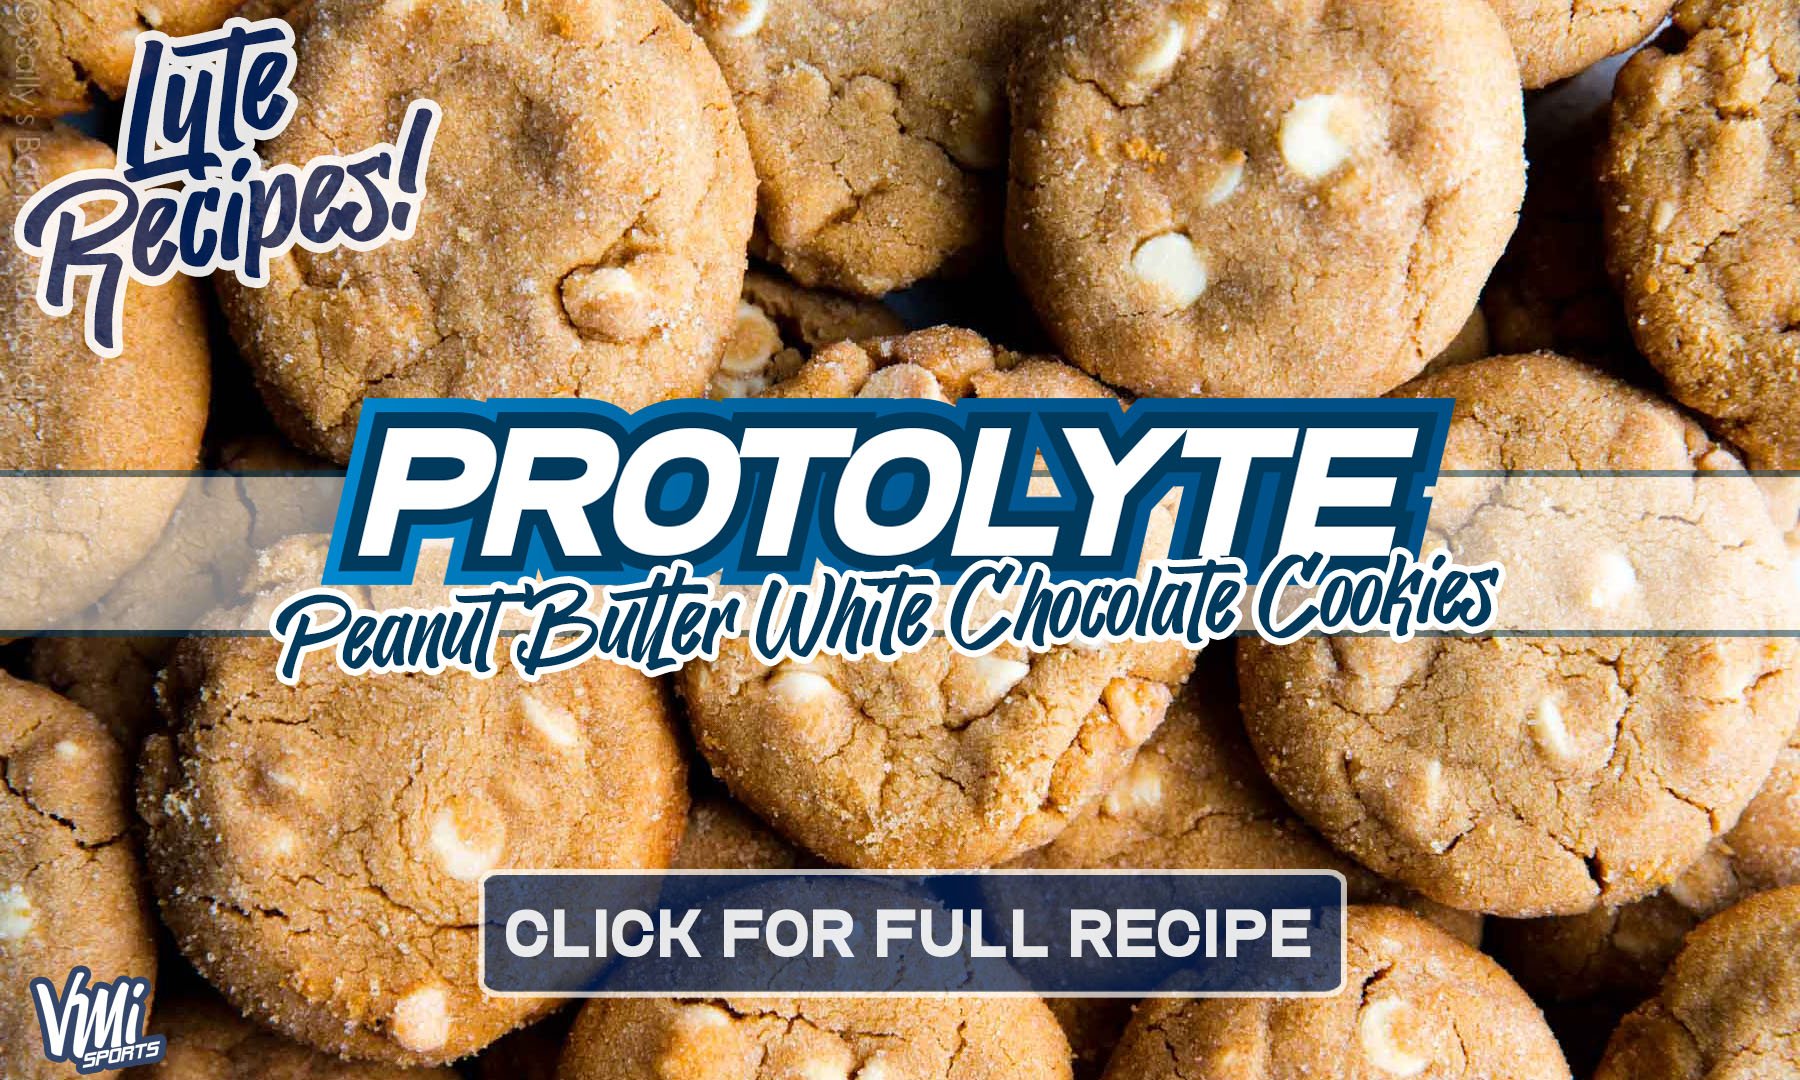 PEANUT BUTTER WHITE CHOCOLATE PROTOLYTE COOKIES